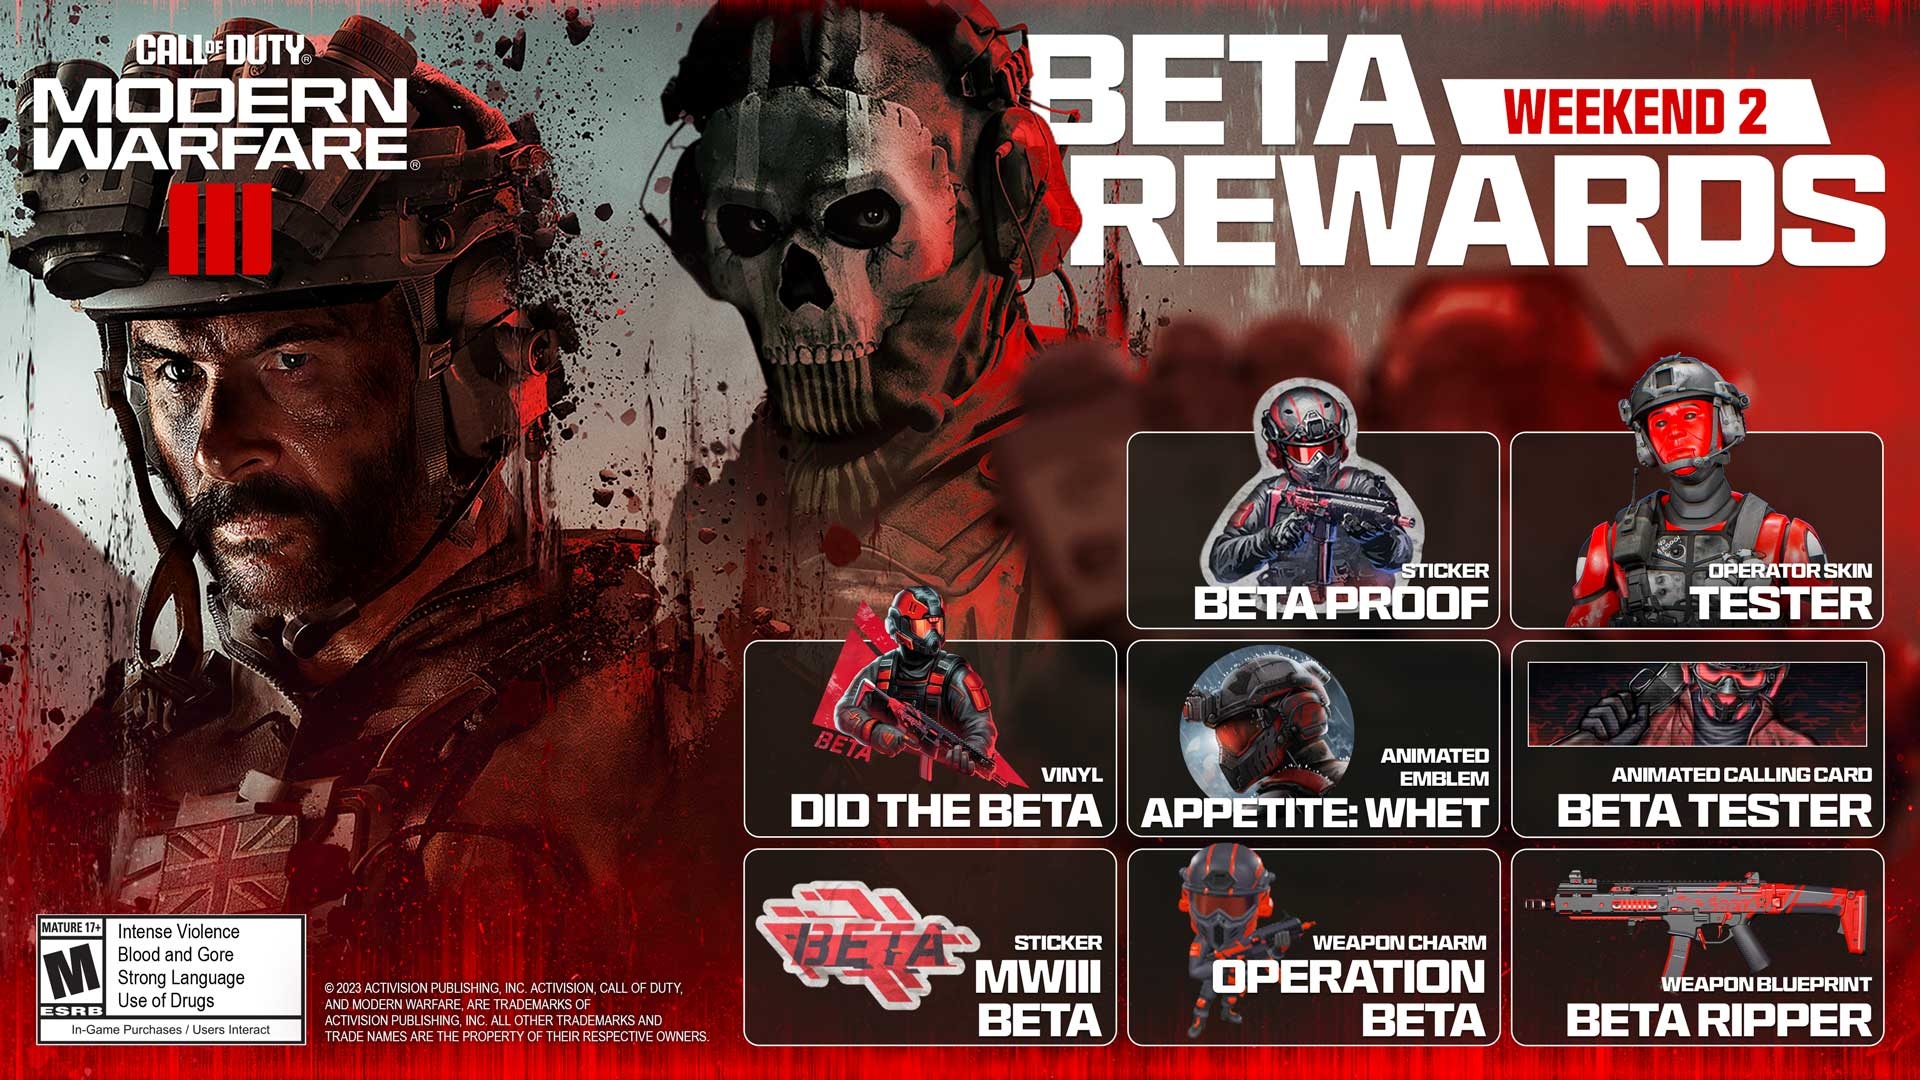 (Already in the beta you can try all skins only if you pre-ordered)